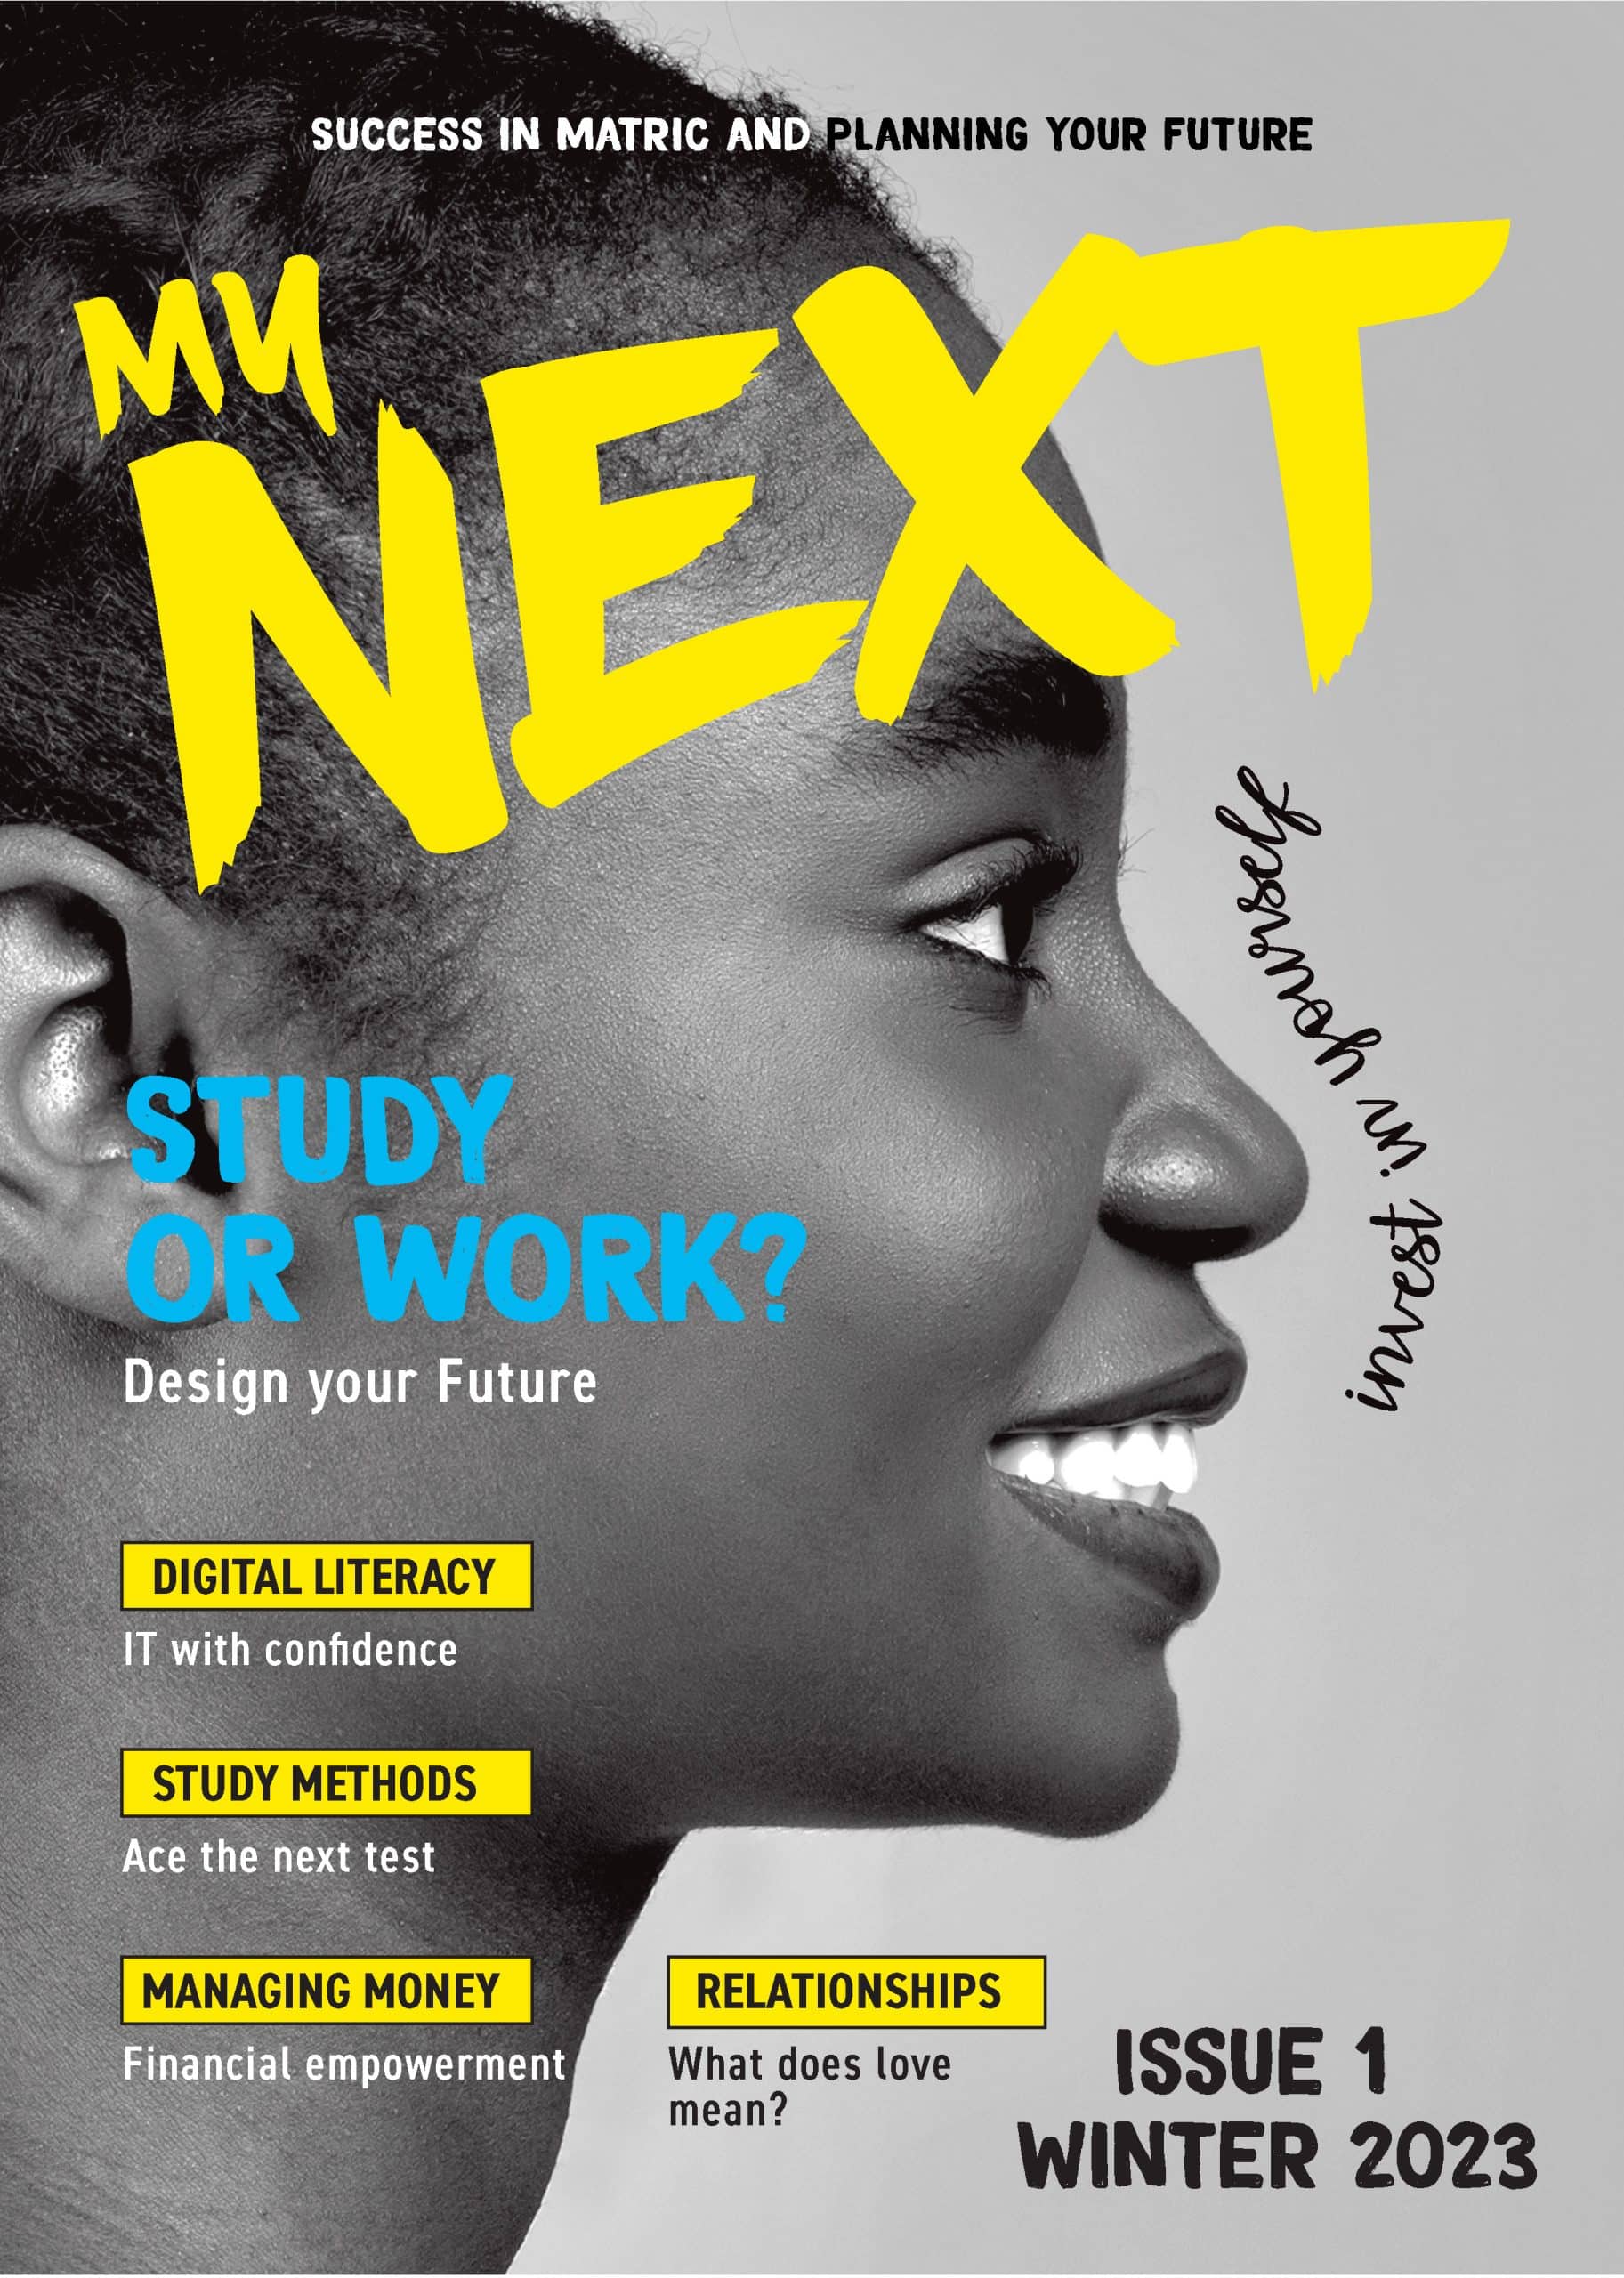 MY NEXT— Success in Matric and planning your future